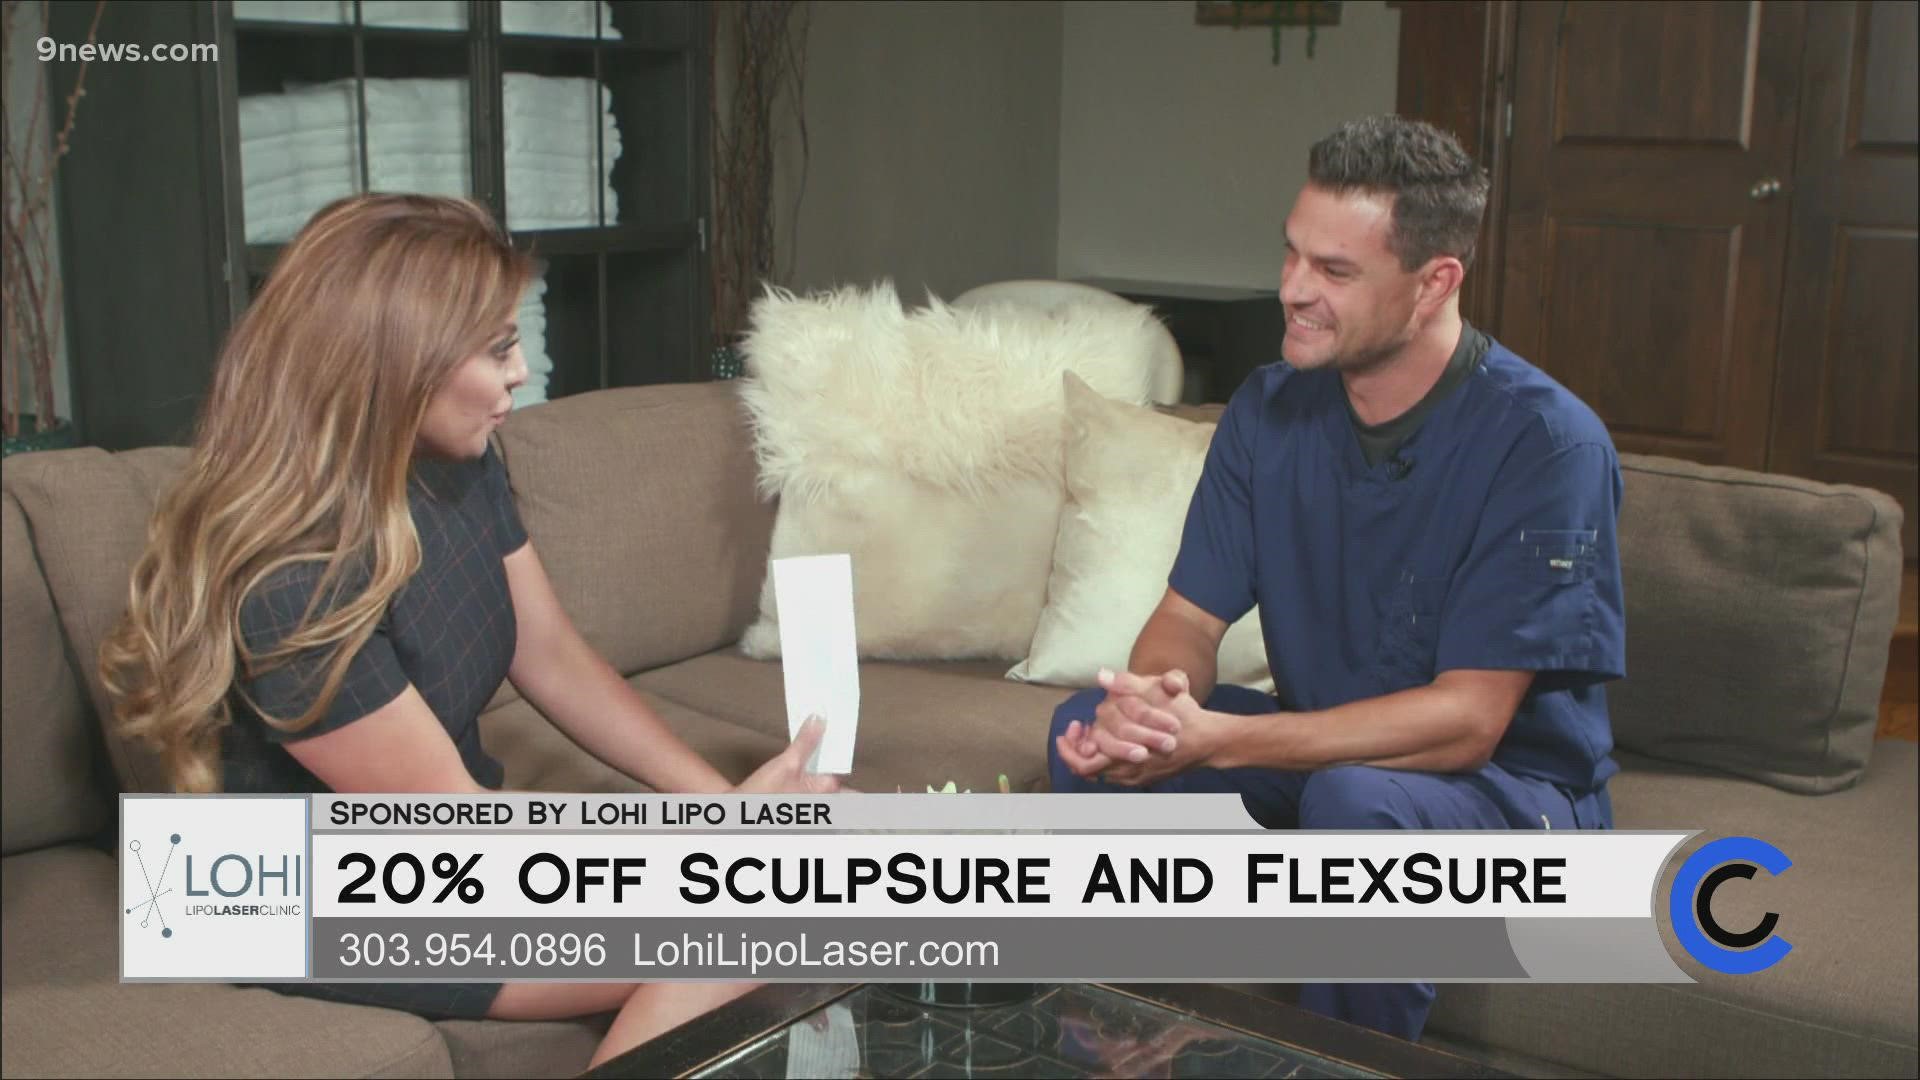 Call 303.954.0896 or visit LohiLipoLaser.com to get started with SculpSure/FlexSure at 20% off, free nutritional counseling, and light pod sessions! **PAID CONTENT**